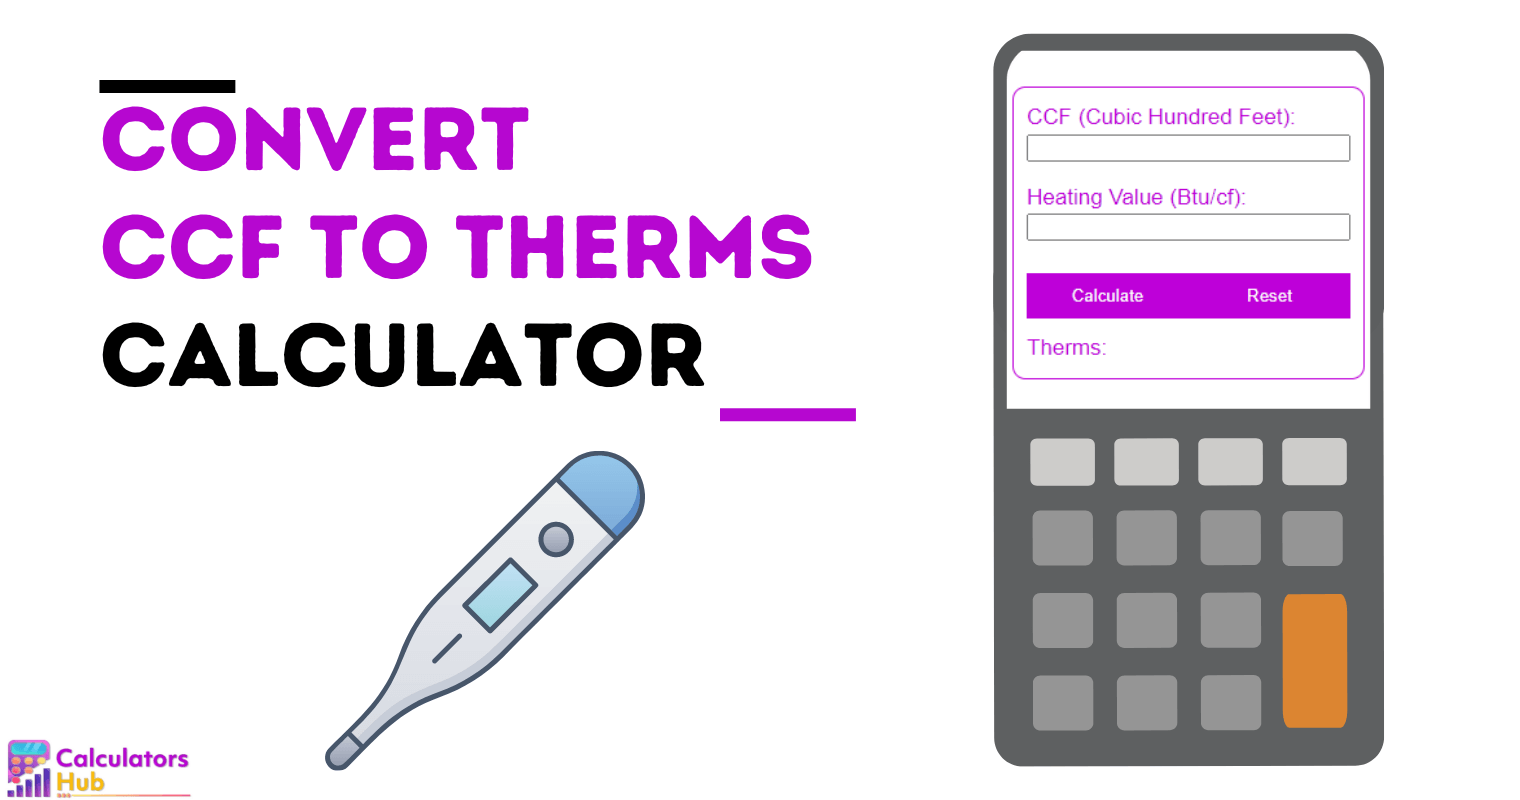 Convert CCF to Therms Calculator